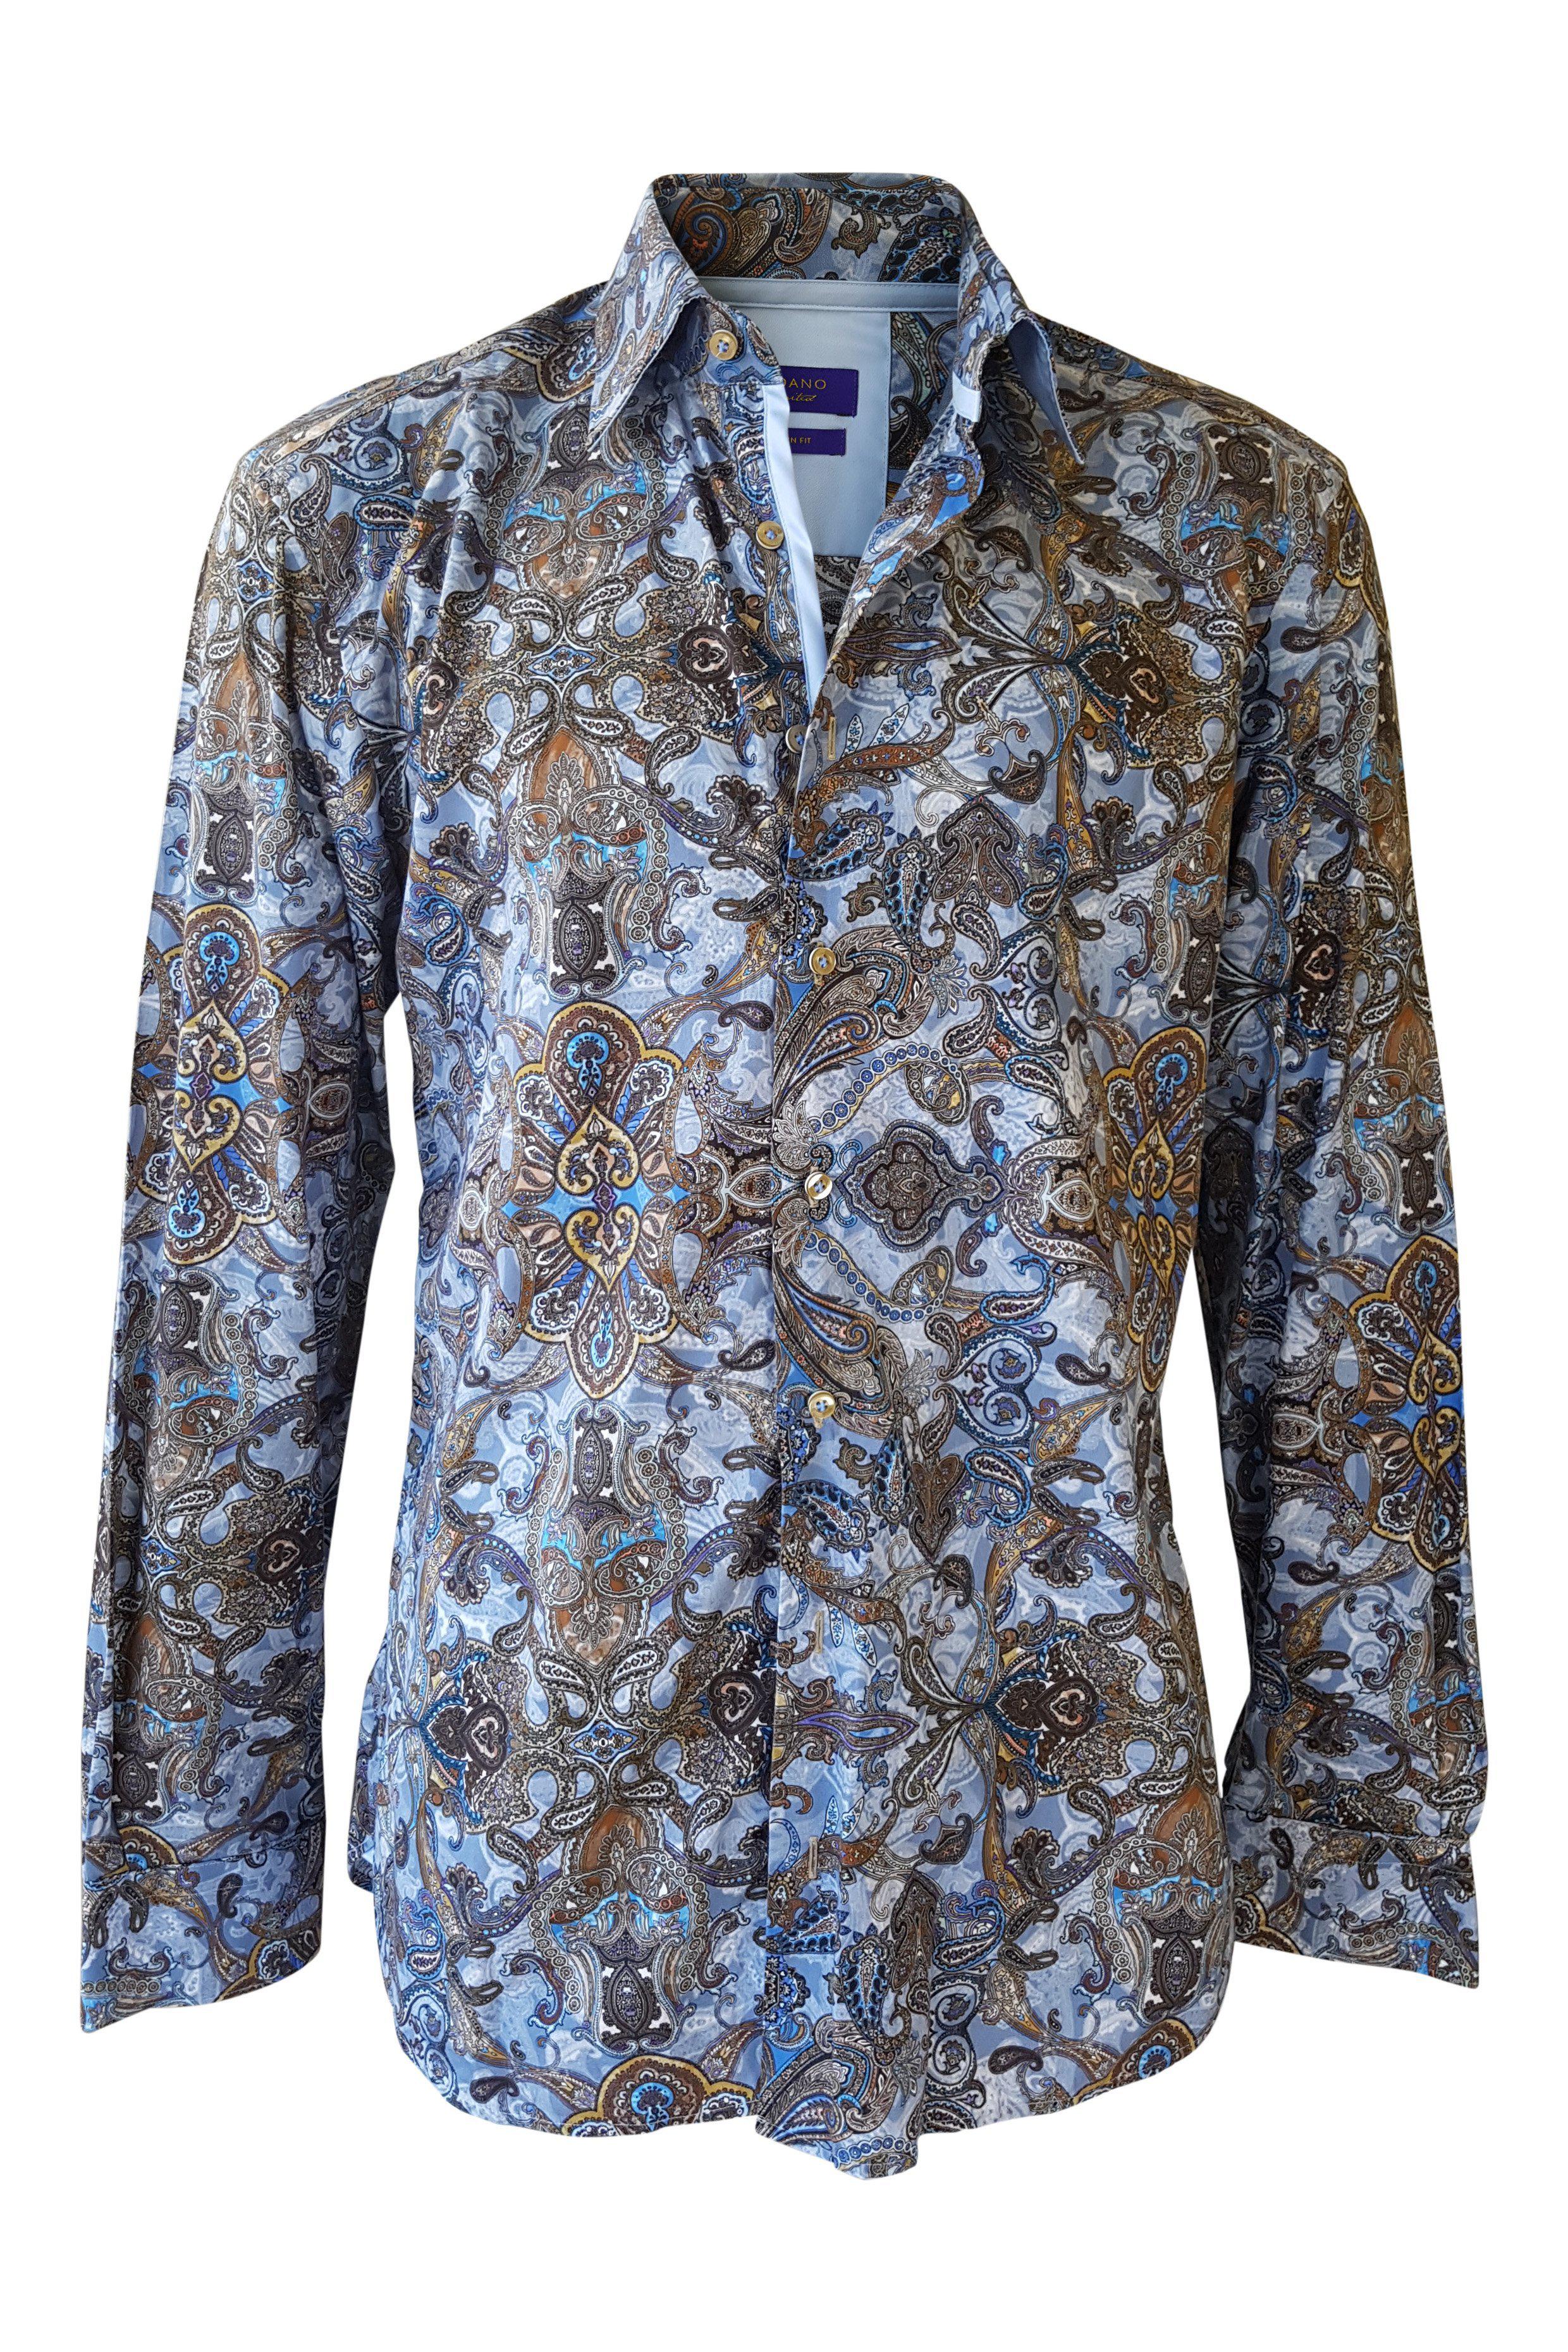 GIORDIANO Blue Paisley Print Blazer and Shirt Set (IT 52)-Giordiano-The Freperie